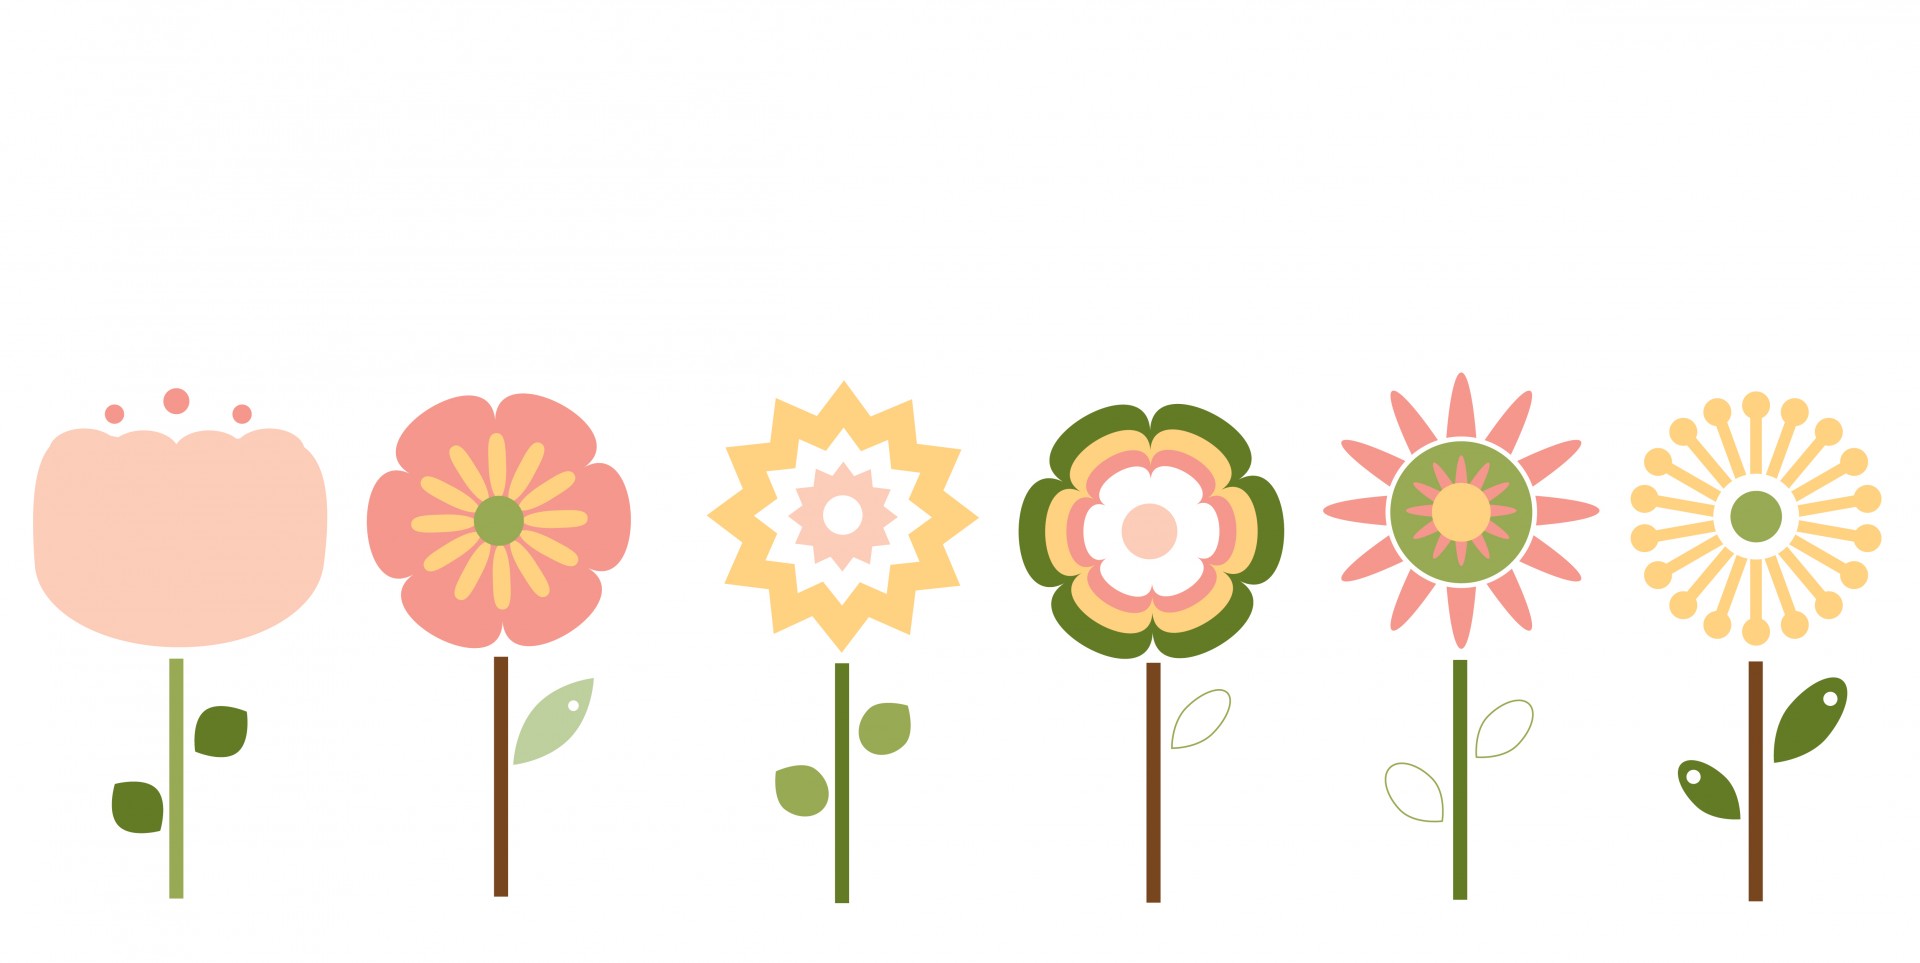 Flowers Clipart Free Stock Photo.